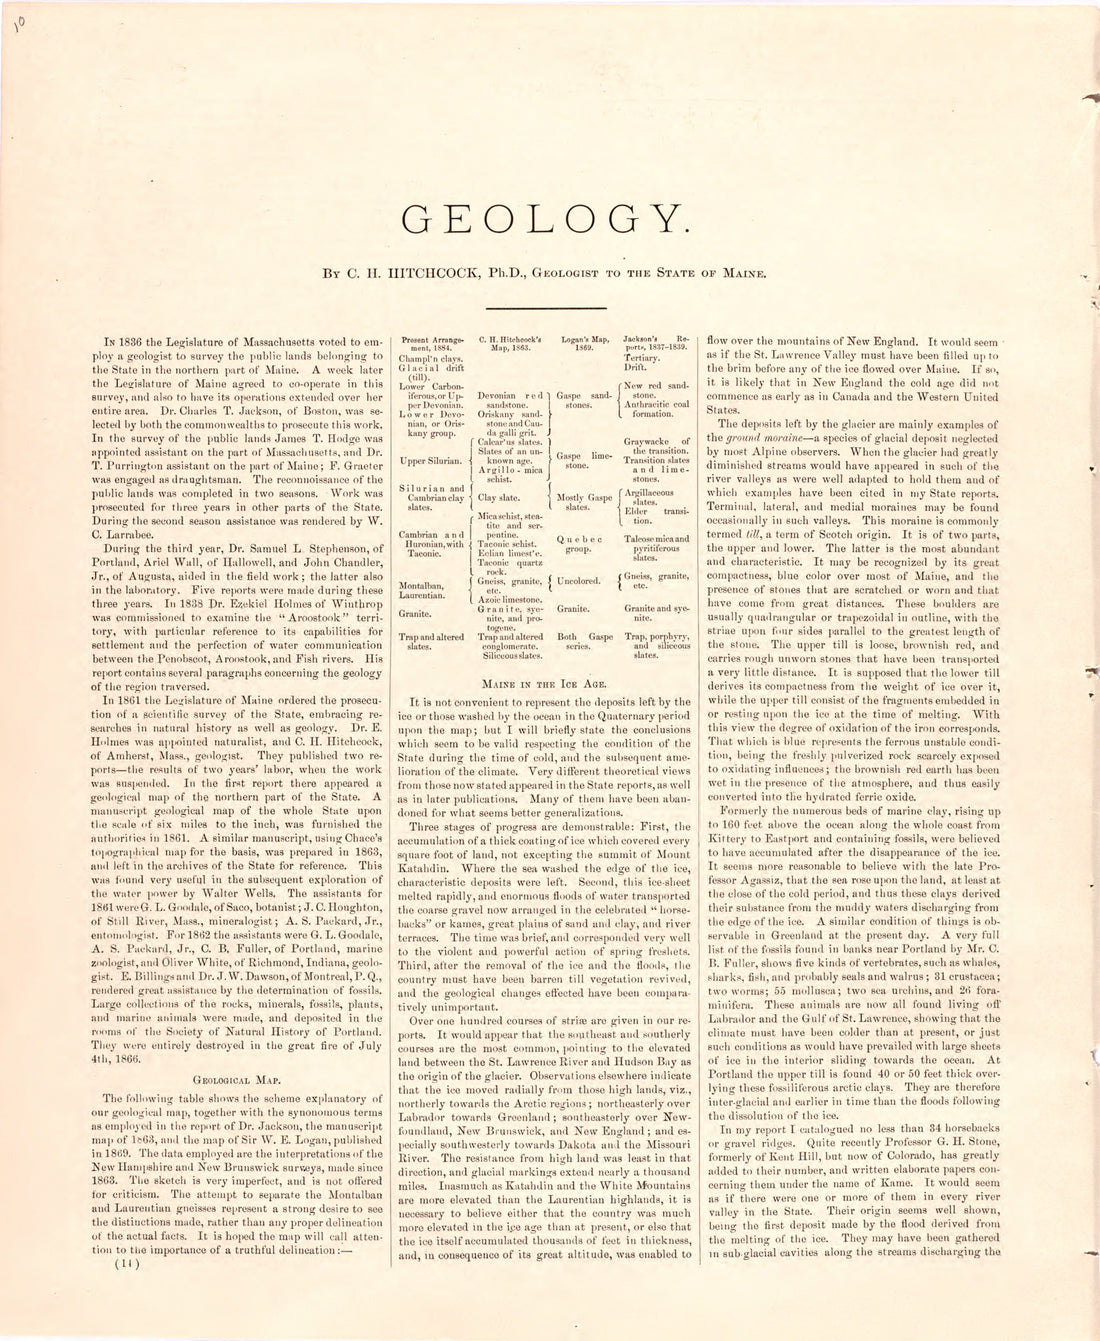 This hand drawn illustration (map) of Geologycontinued from Colby&